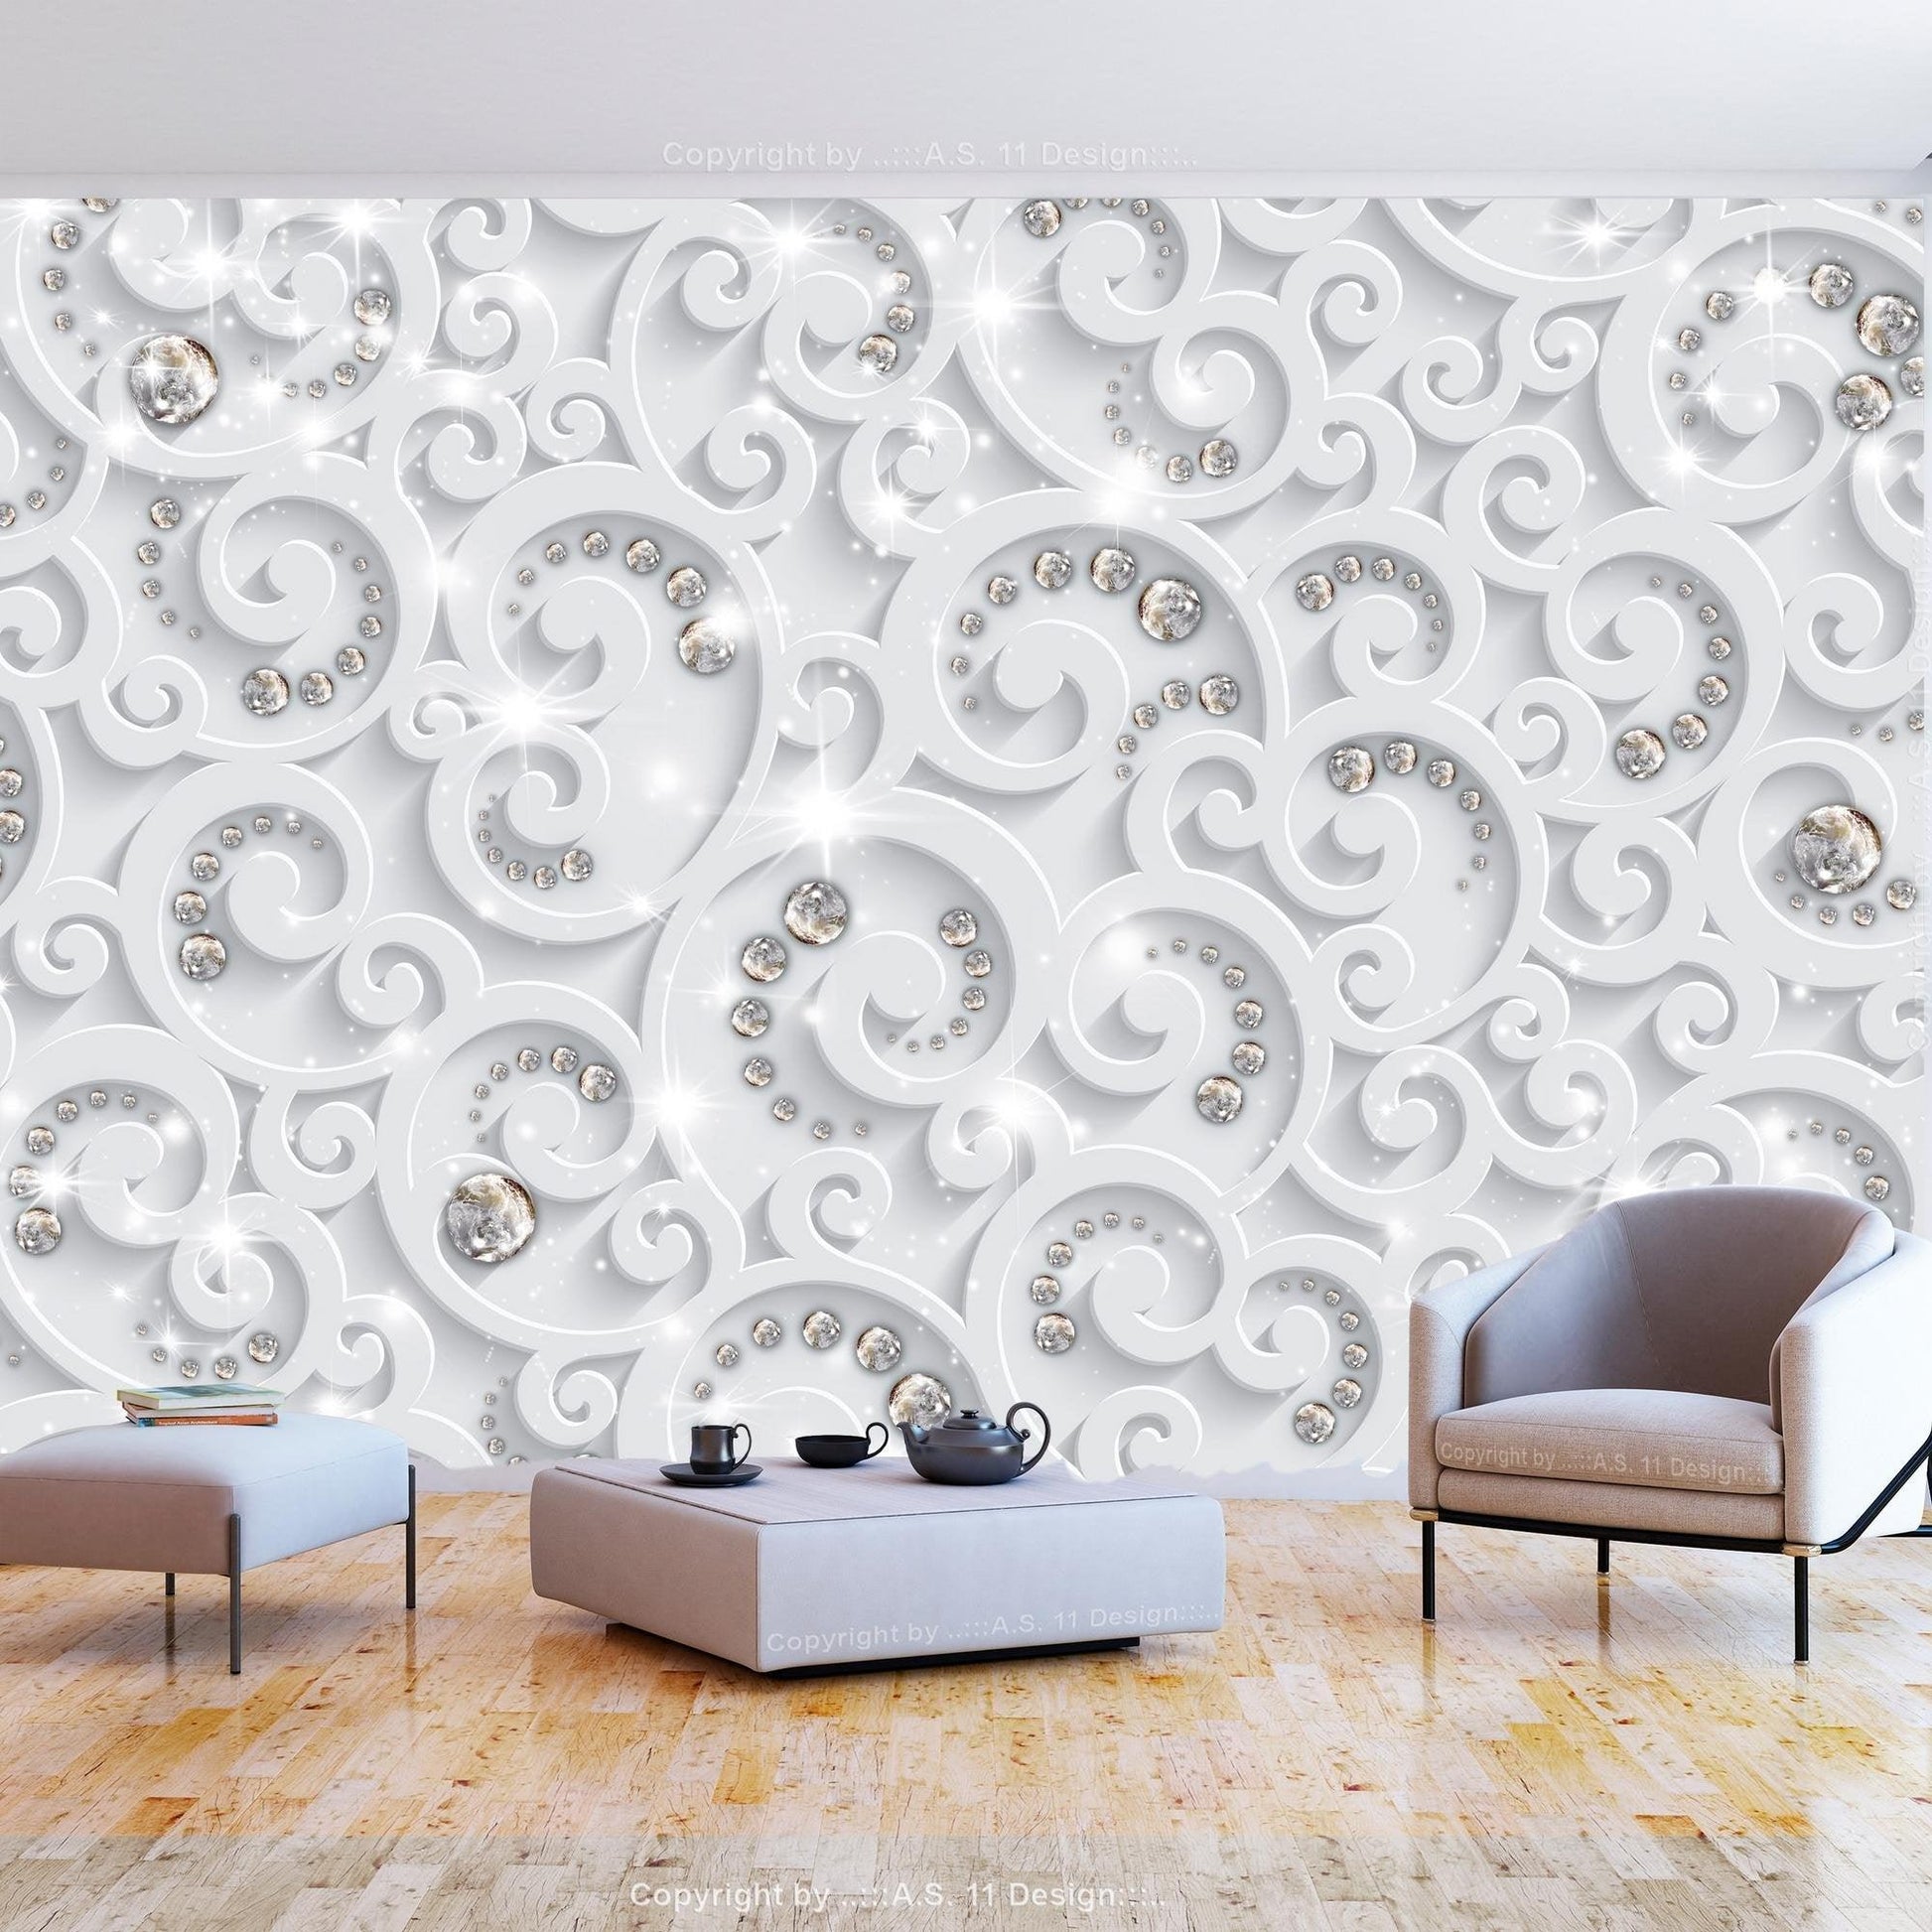 Peel and stick wall mural - Abstract Glamor - www.trendingbestsellers.com